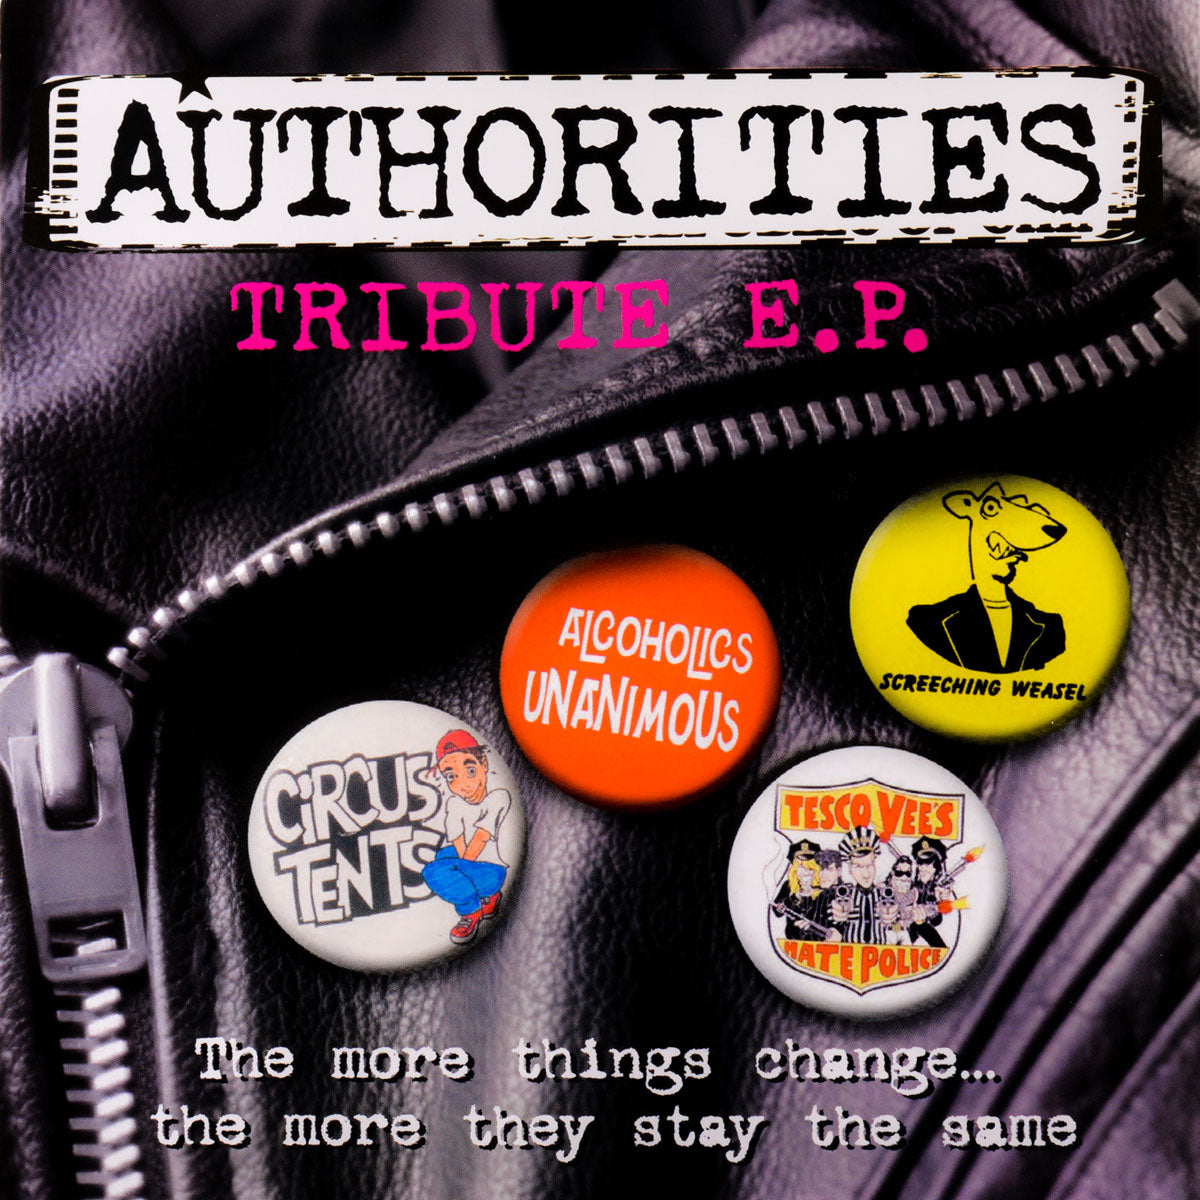 V/A- Authorities Tribute EP 7” ~W/ SCREECHING WEASEL / TESCO VEE'S HATE POLICE!